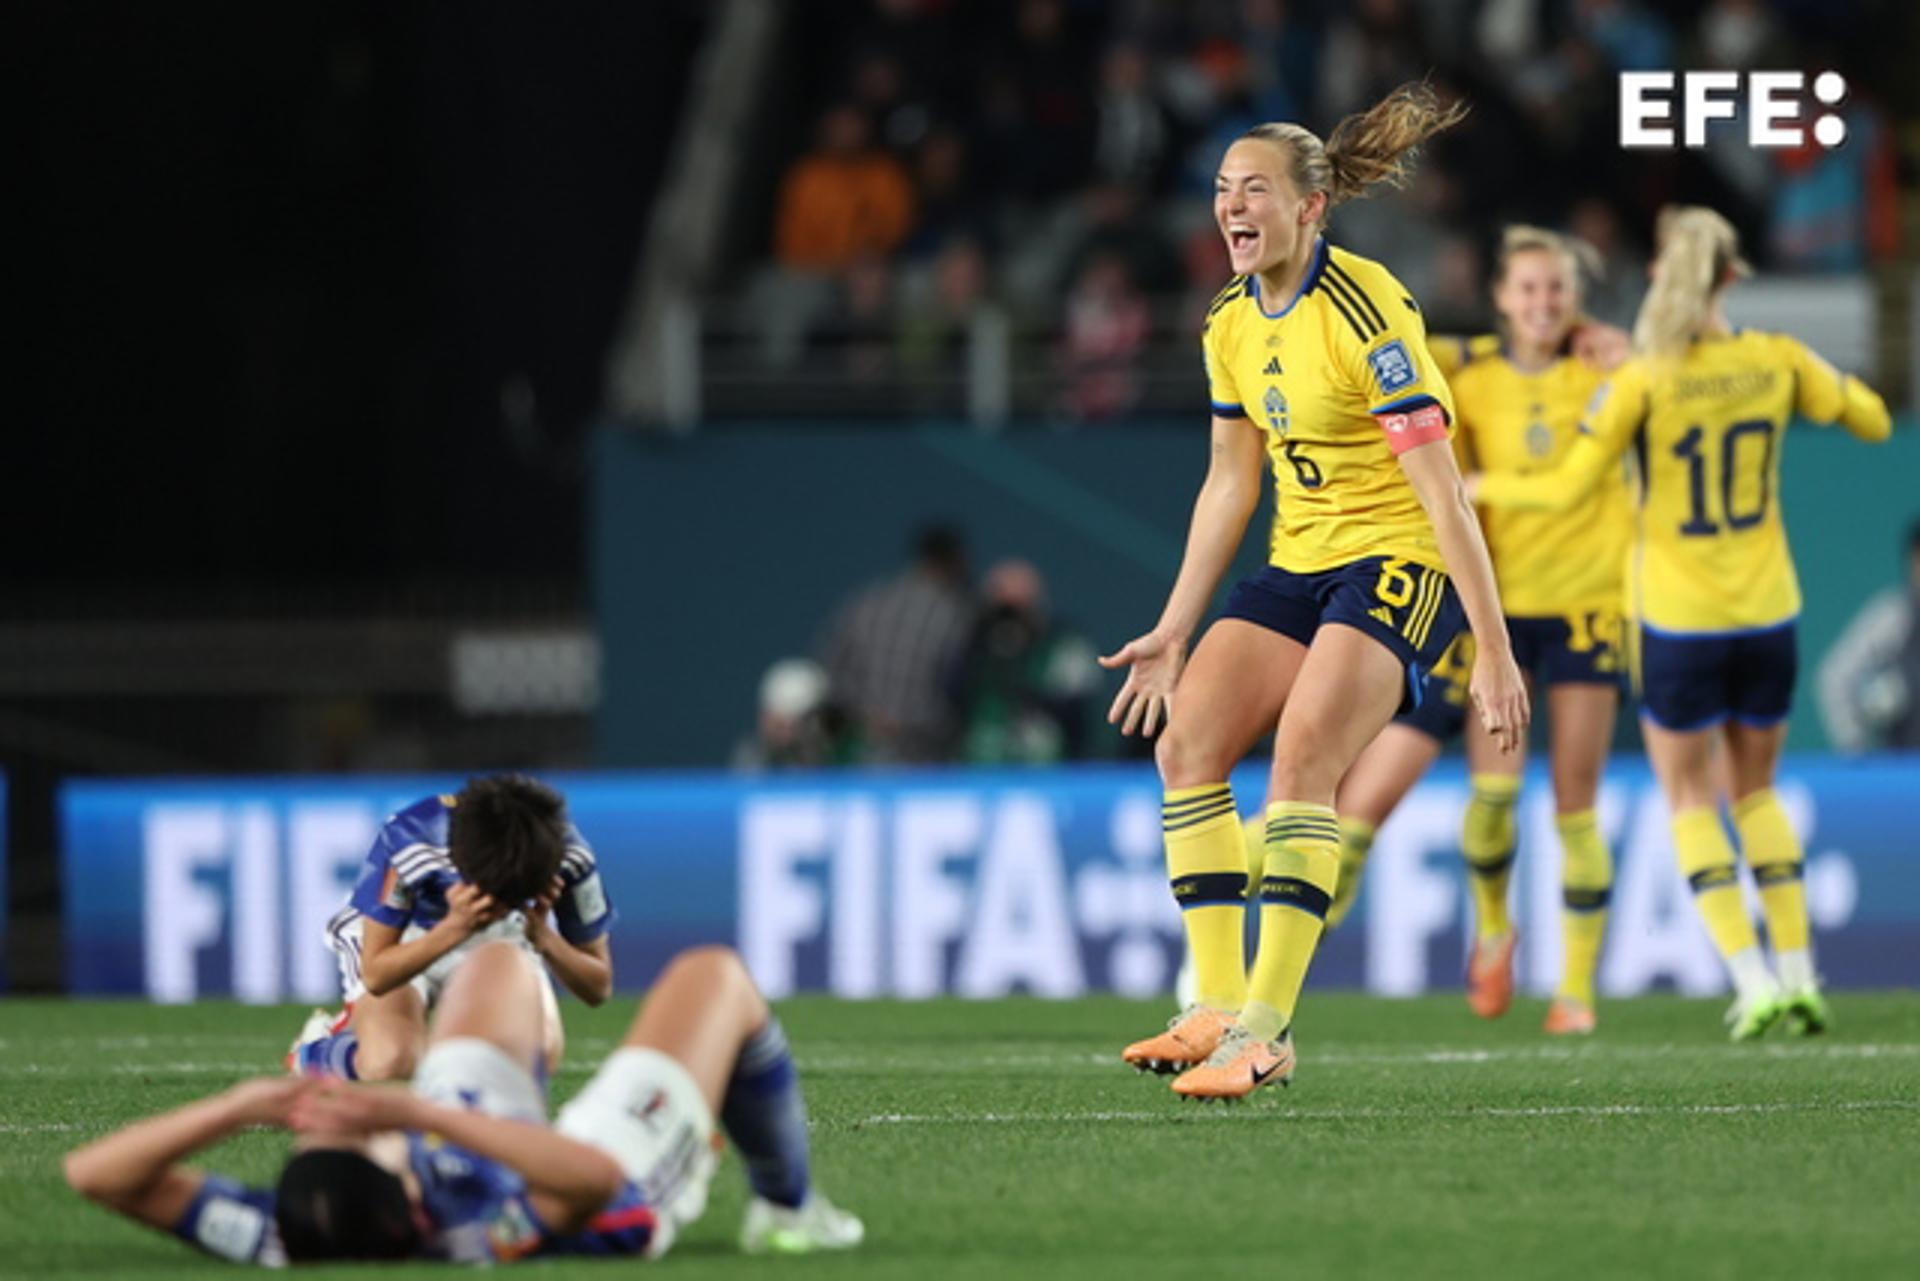 Sweden's Magdalena Eriksson celebrates following the team's win over Japan in the FIFA Women's World Cup 2023 quarterfinal in Auckland, New Zealand, 11 August 2023. EFE/EPA/BRETT PHIBBS AUSTRALIA AND NEW ZEALAND OUT
